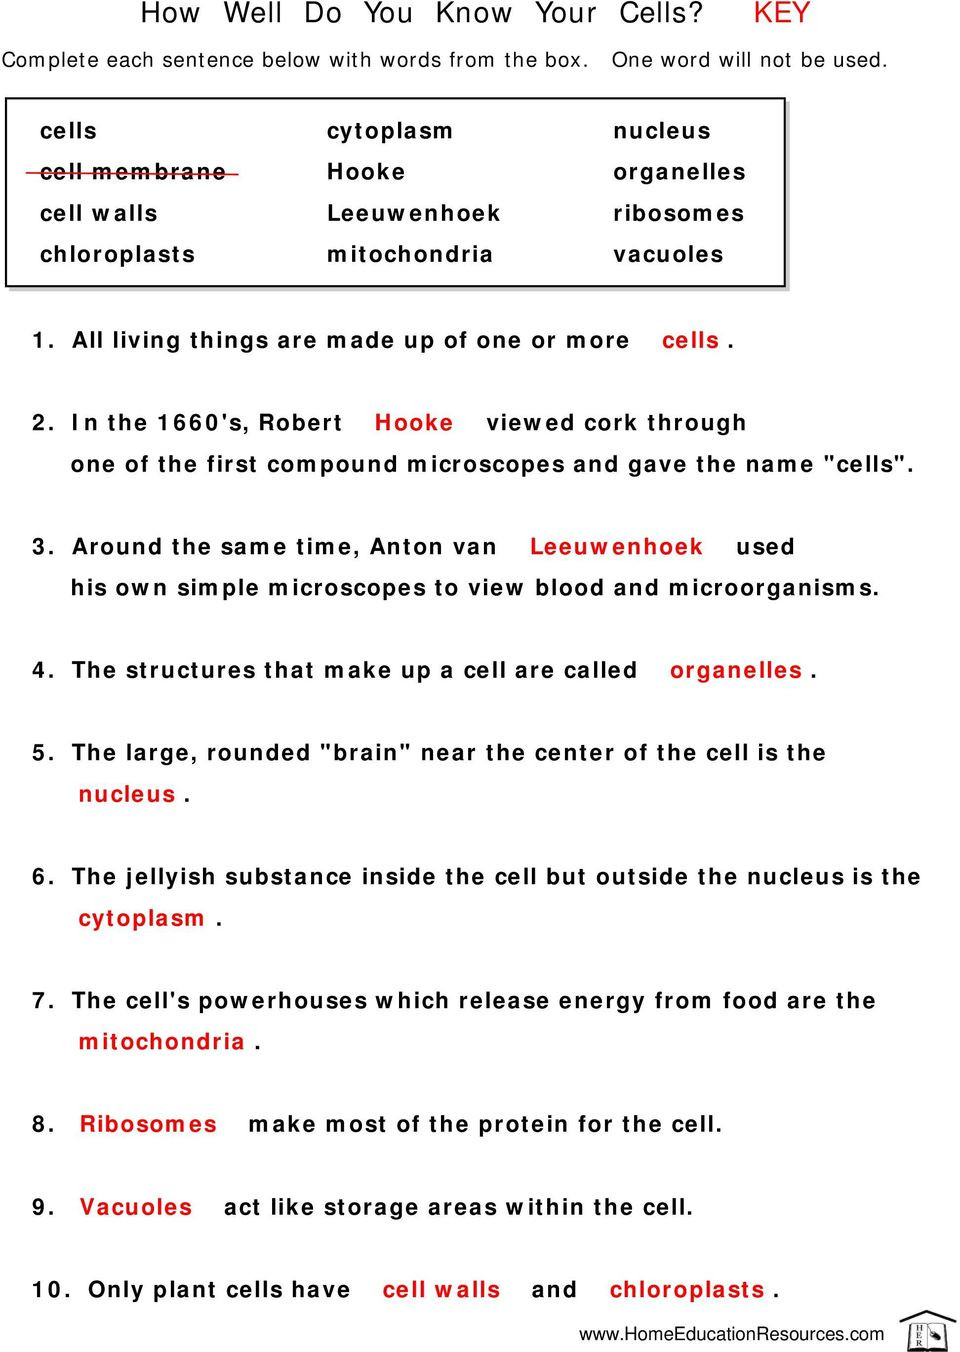 Cell City Analogy Worksheet How Well Do You Know Your Cells Pdf Free Download